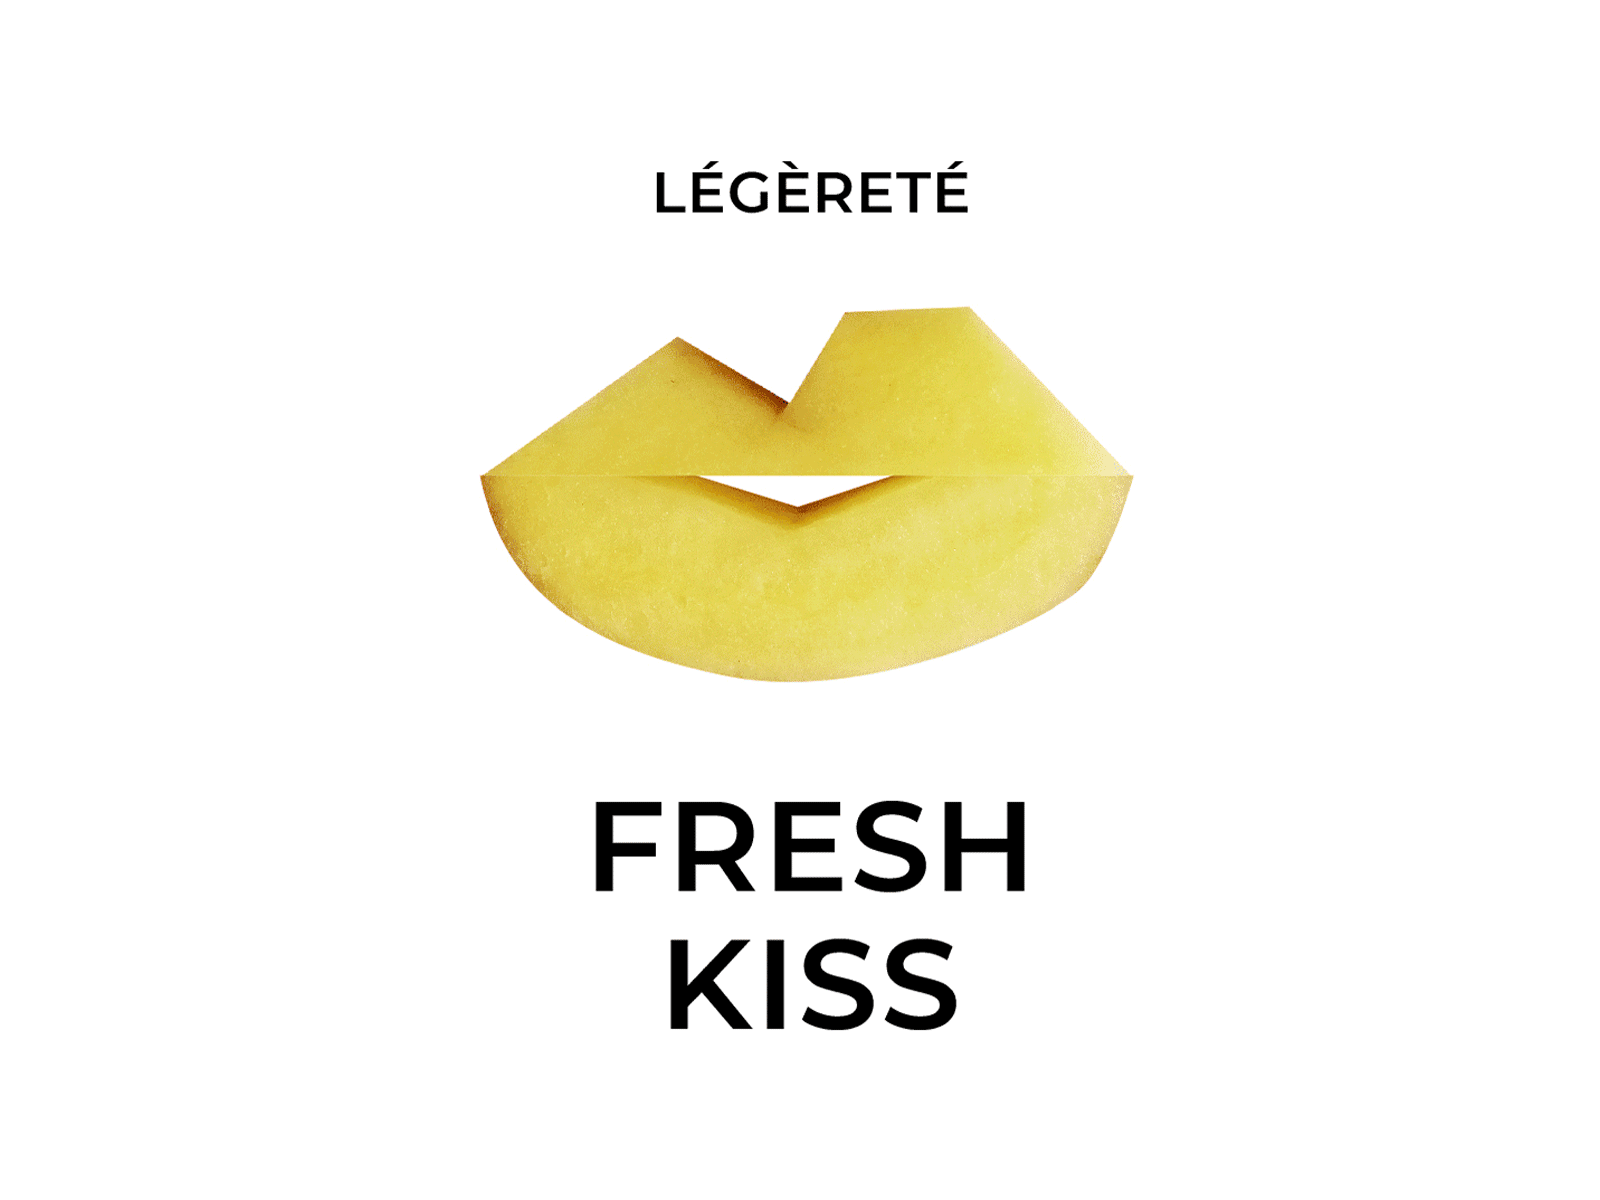 Fresh kiss animated gif animation concept design idea logo package packagedesign